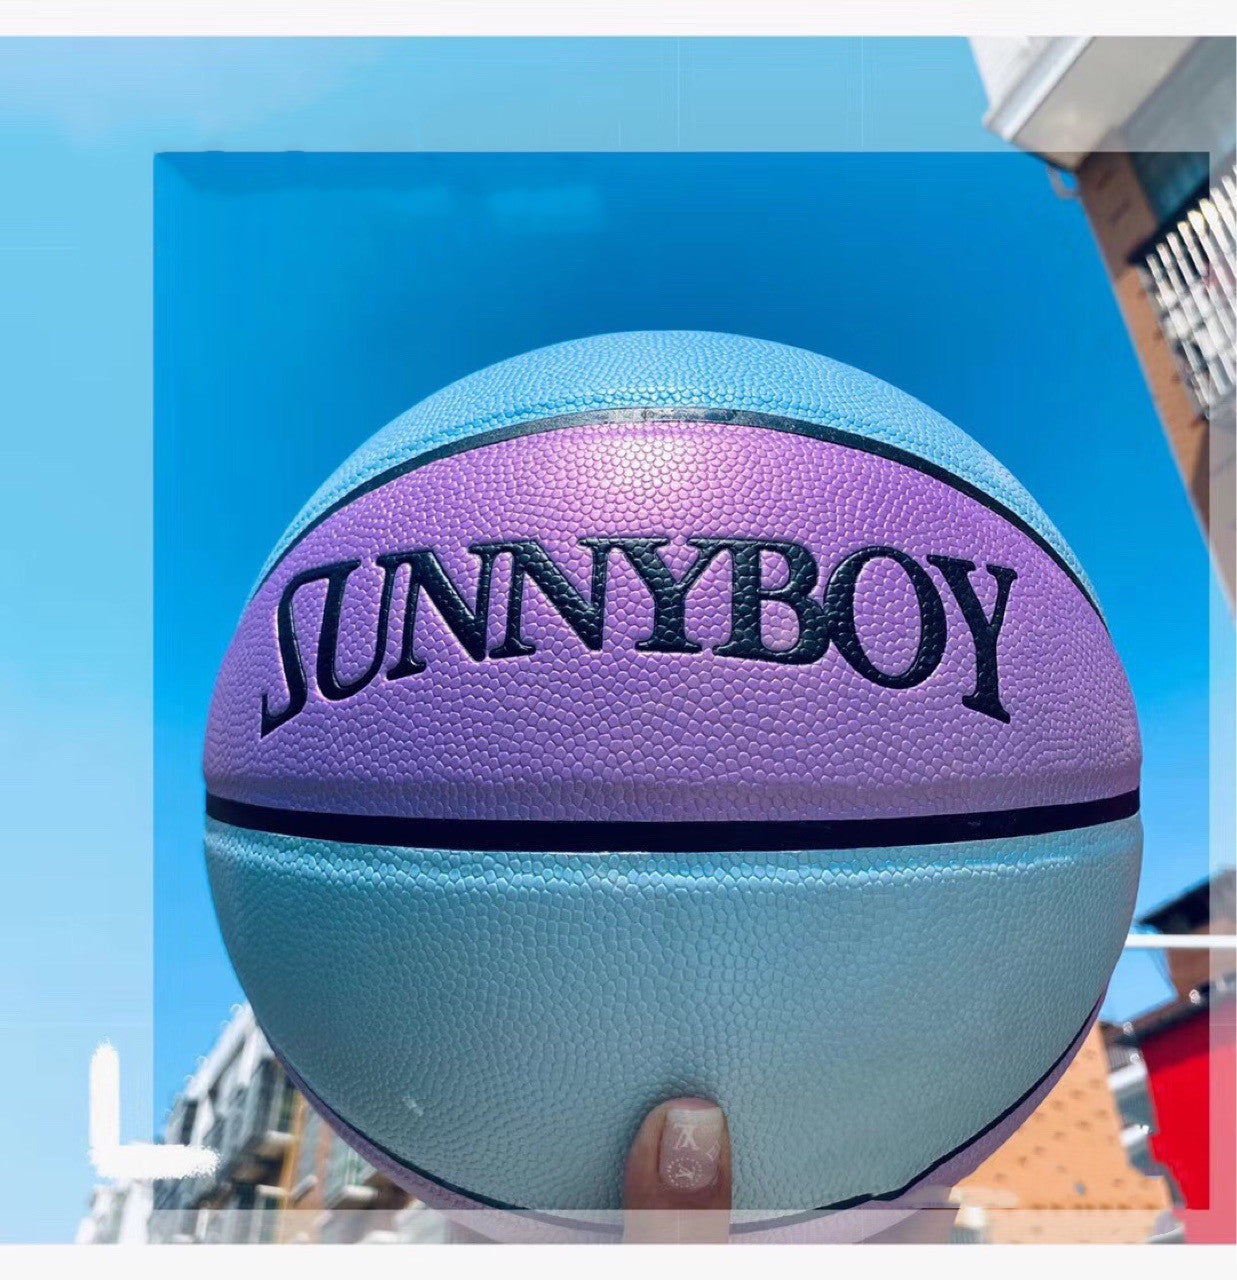 WILKYs0Chameleon smiley basketball
 Material: Rubber
 
 Applicable scenarios: running sports, fitness equipment
 
 Basketball size: No. 7 basketball (standard ball)
 
 
 
 
 
 
 
